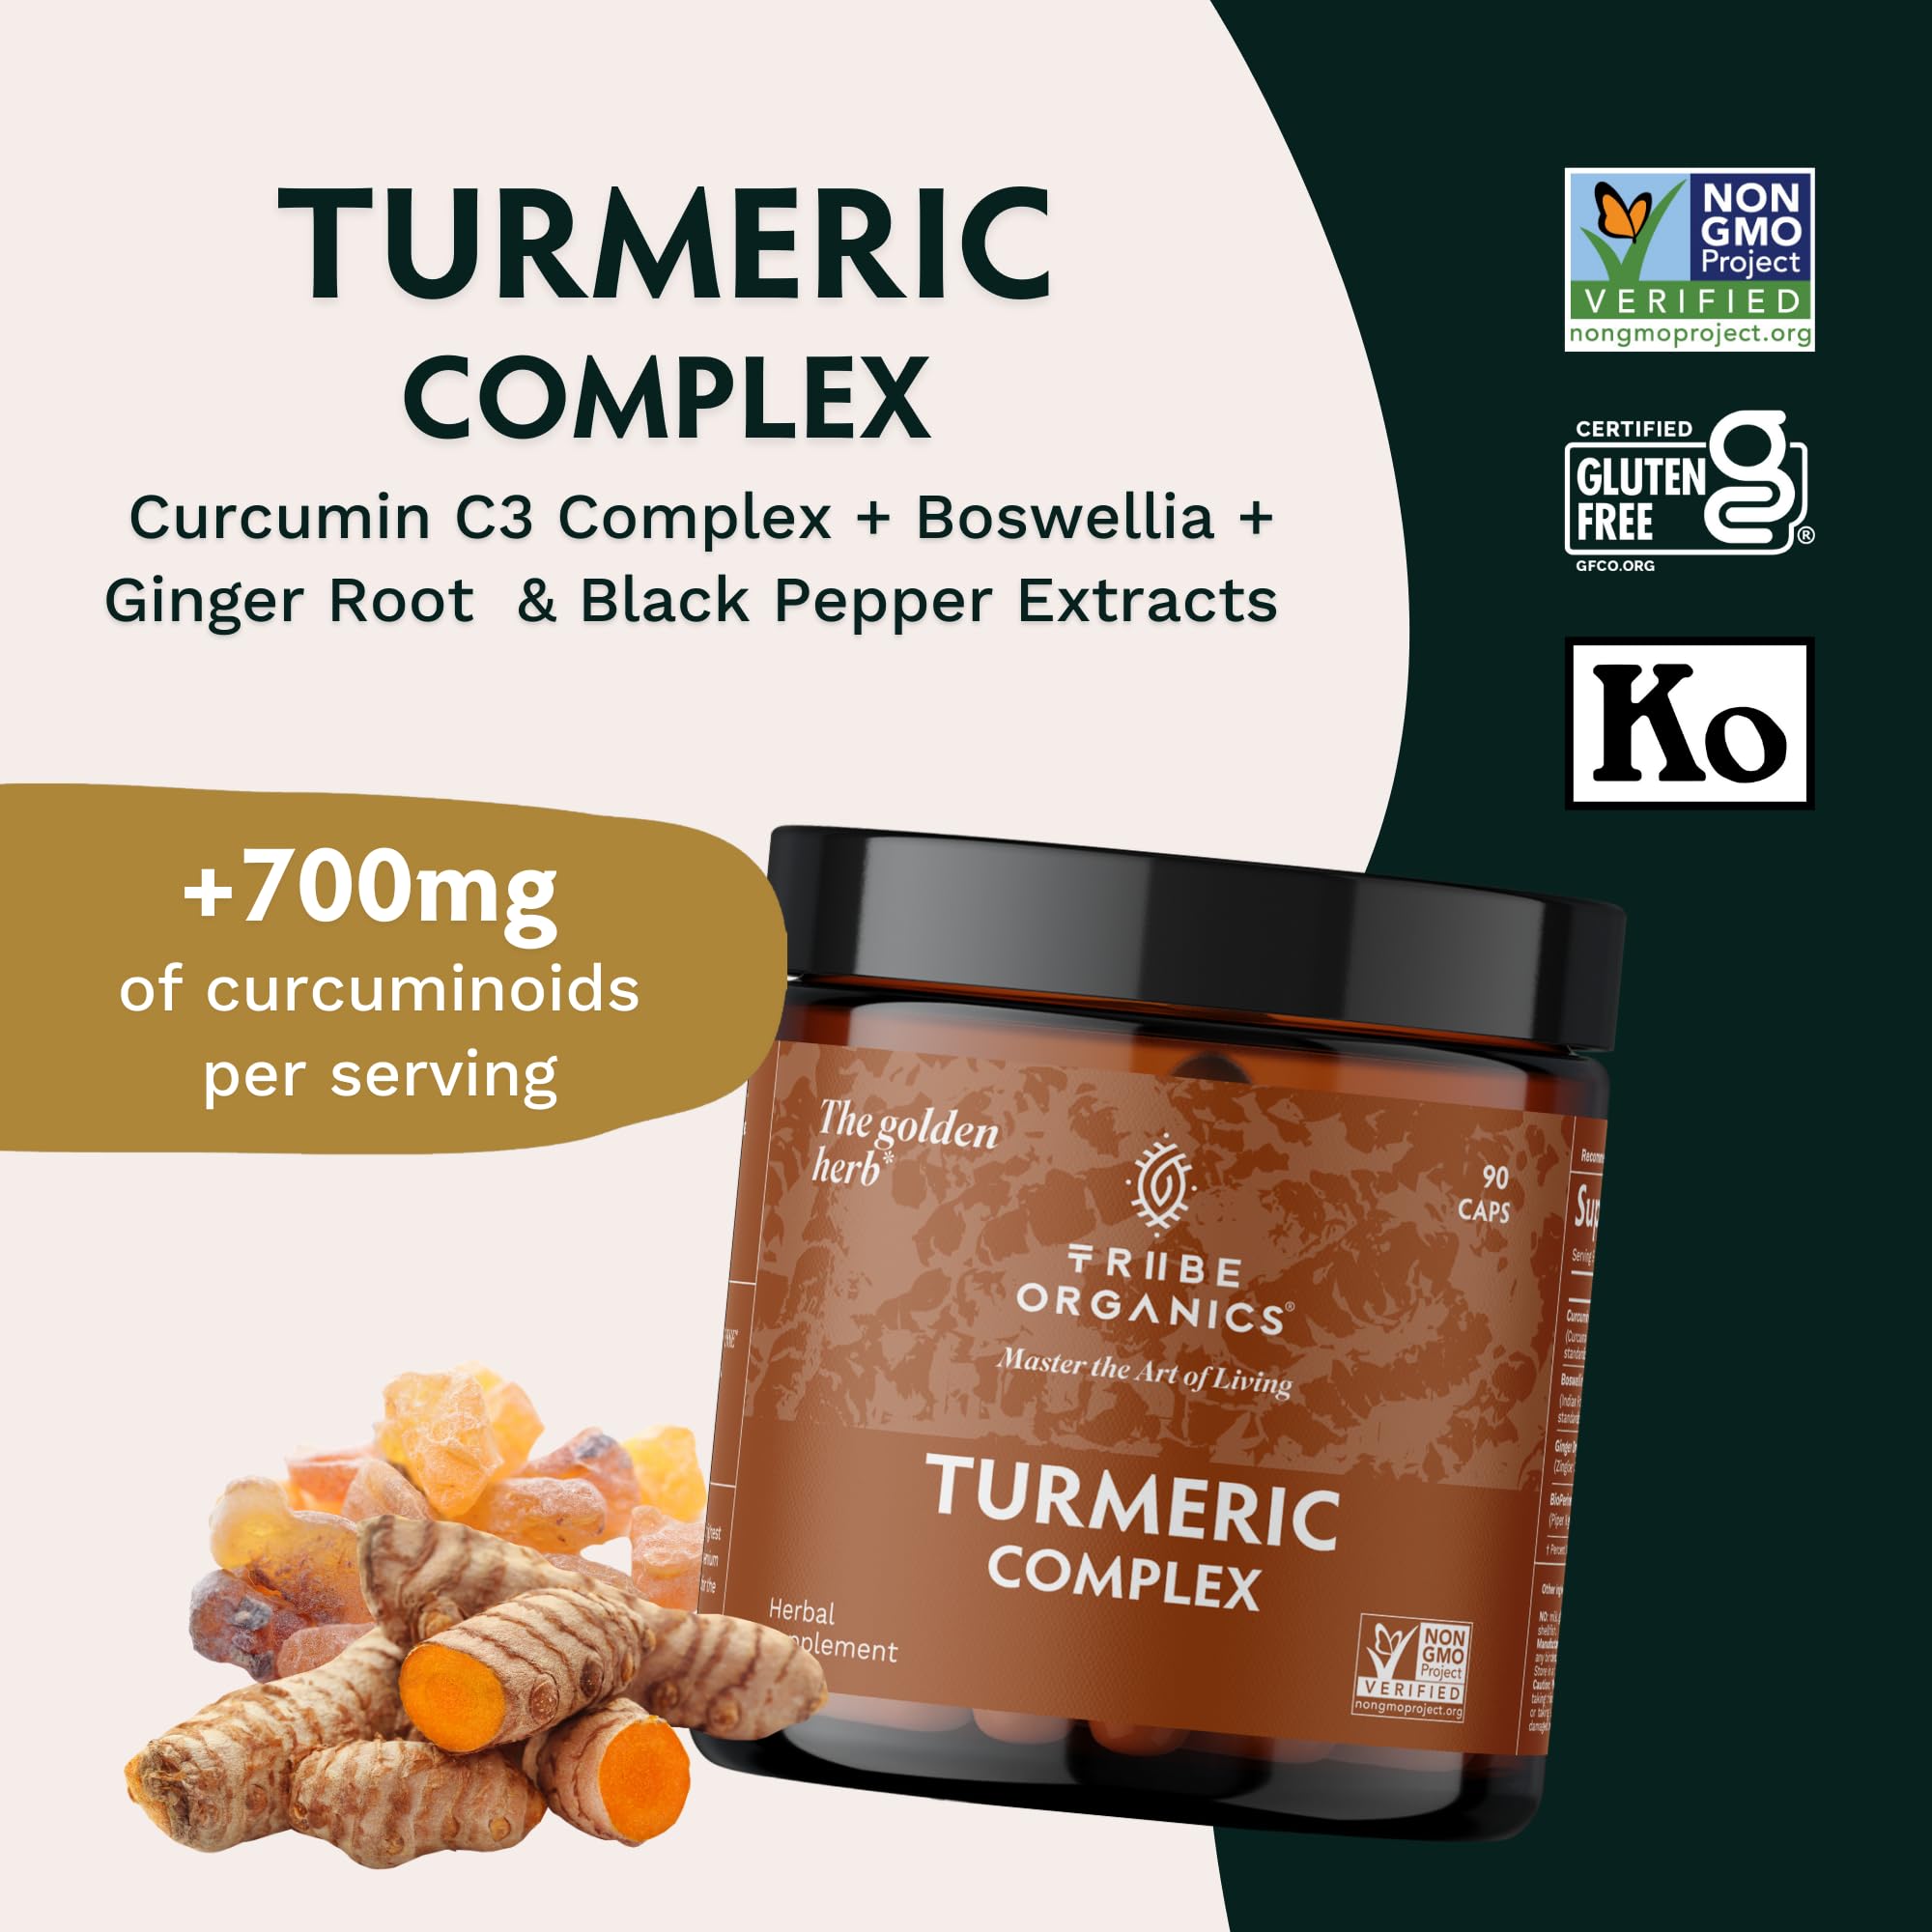 Turmeric Curcumin C3 Complex with BioPerine 1050mg - Natural Joint Support - 95% Curcuminoids & Black Pepper Extract for Ultra High Absorption & Potency - Non GMO - Gluten Free - 90 Vegan Capsules